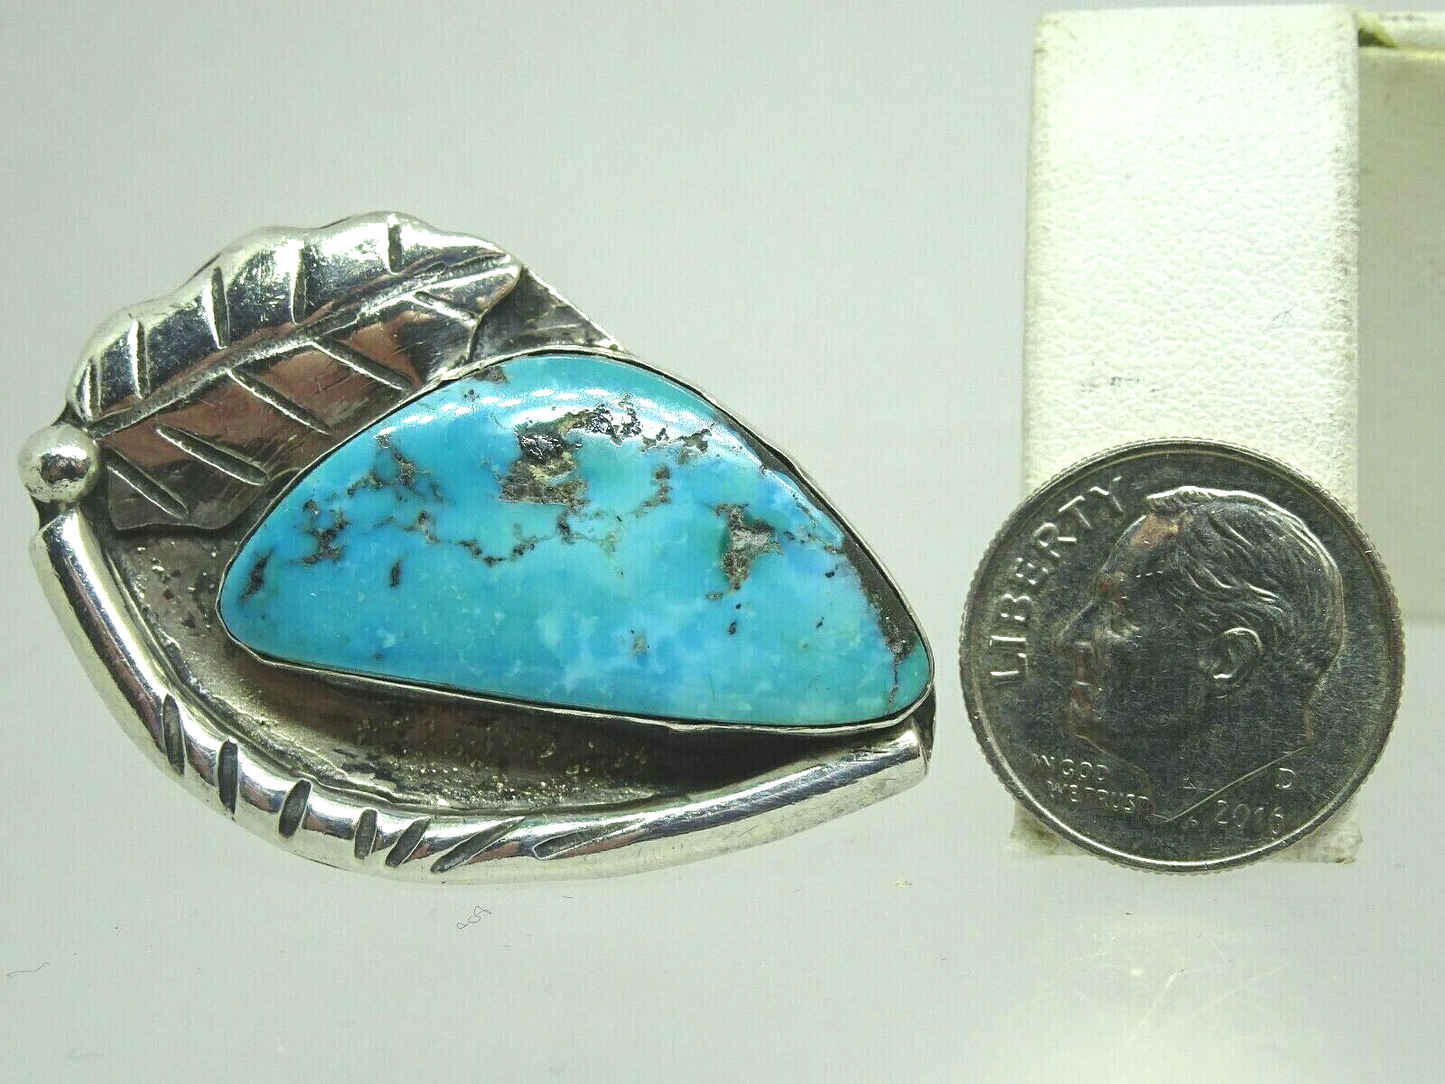 Southwestern Sterling Silver Turquoise Navajo Style Statement Ring, Size 5.5